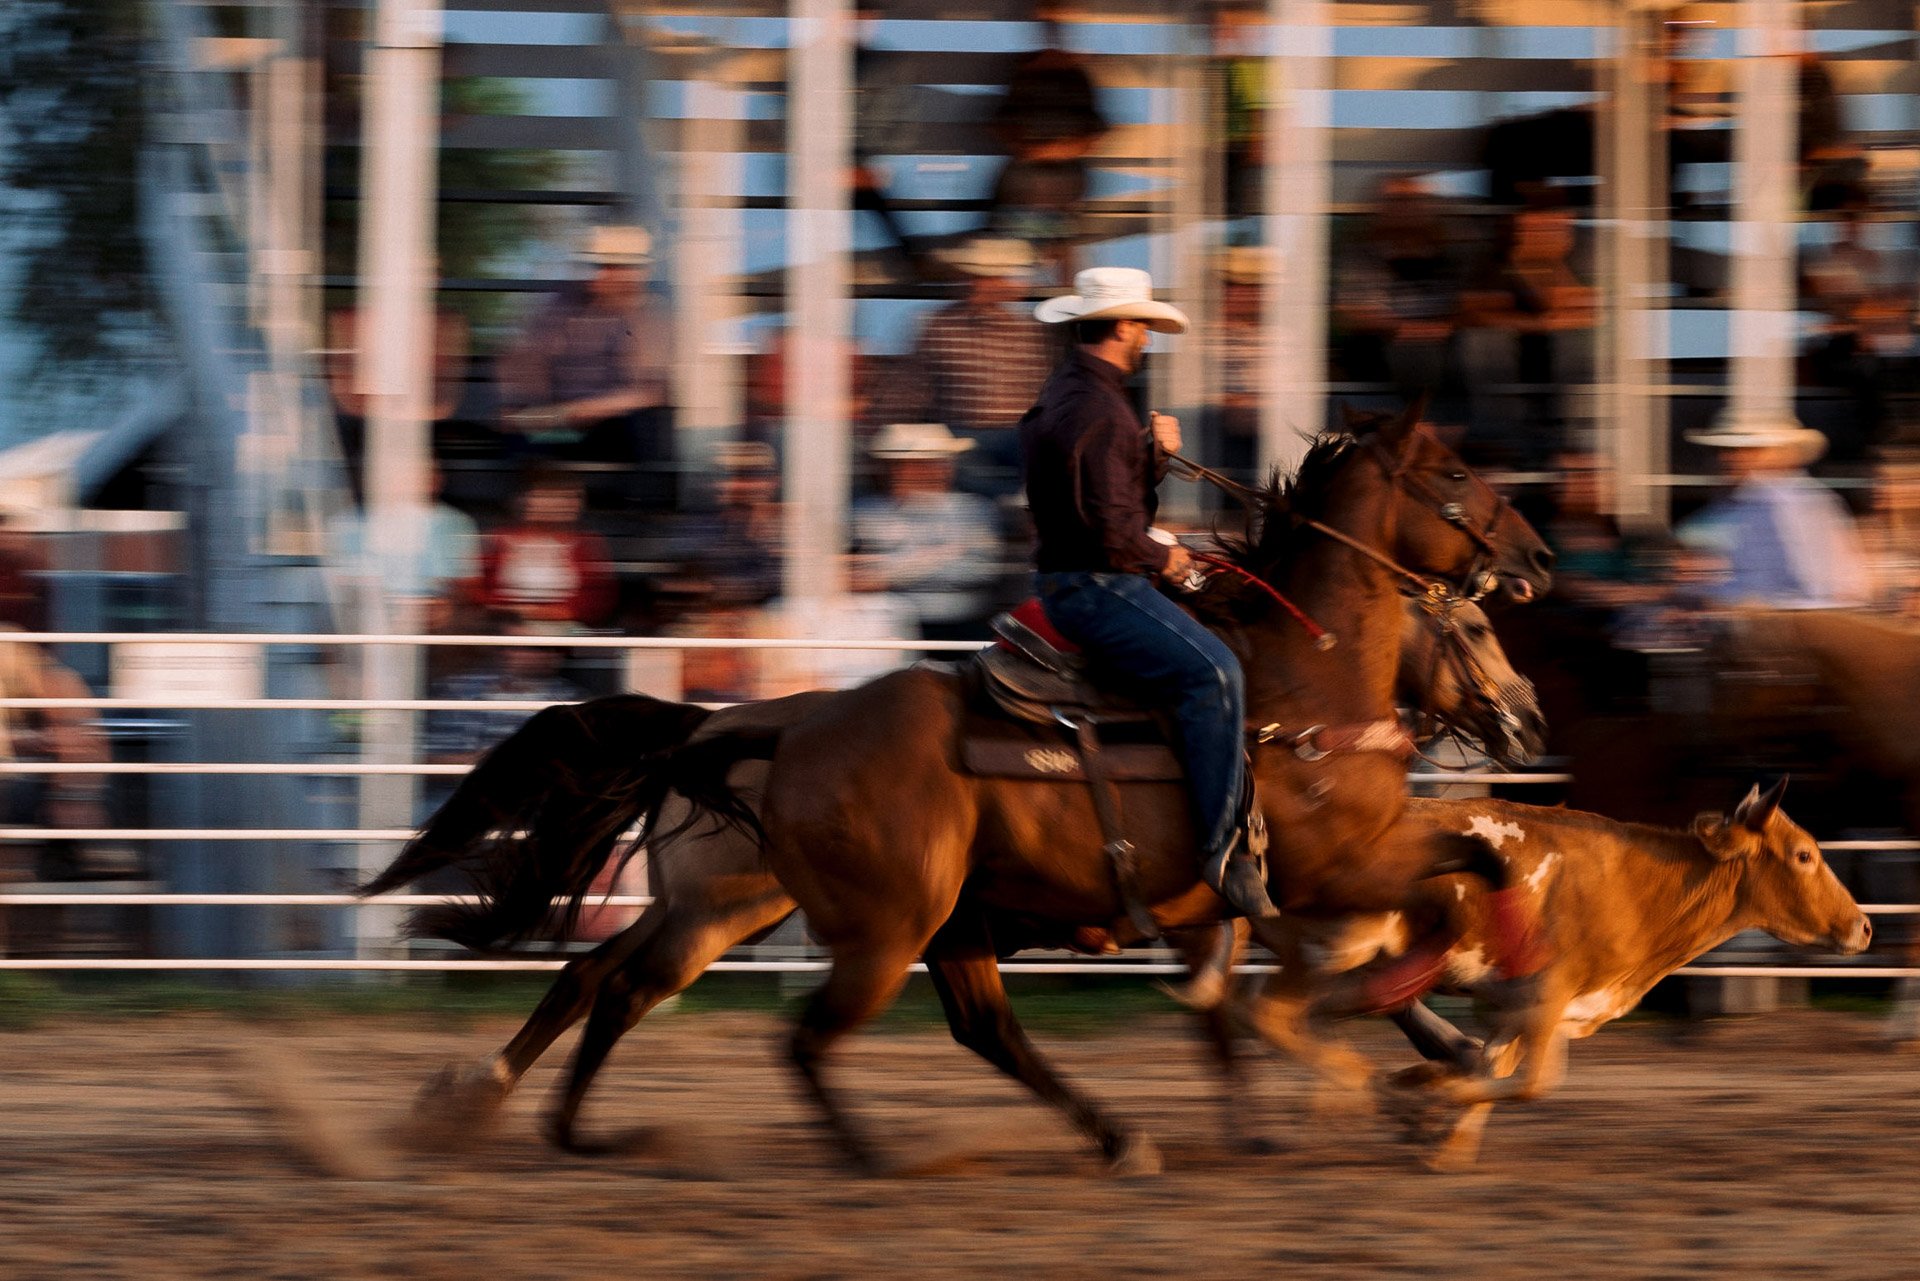 JH-commercial-western-rodeo-photographer-12.jpg